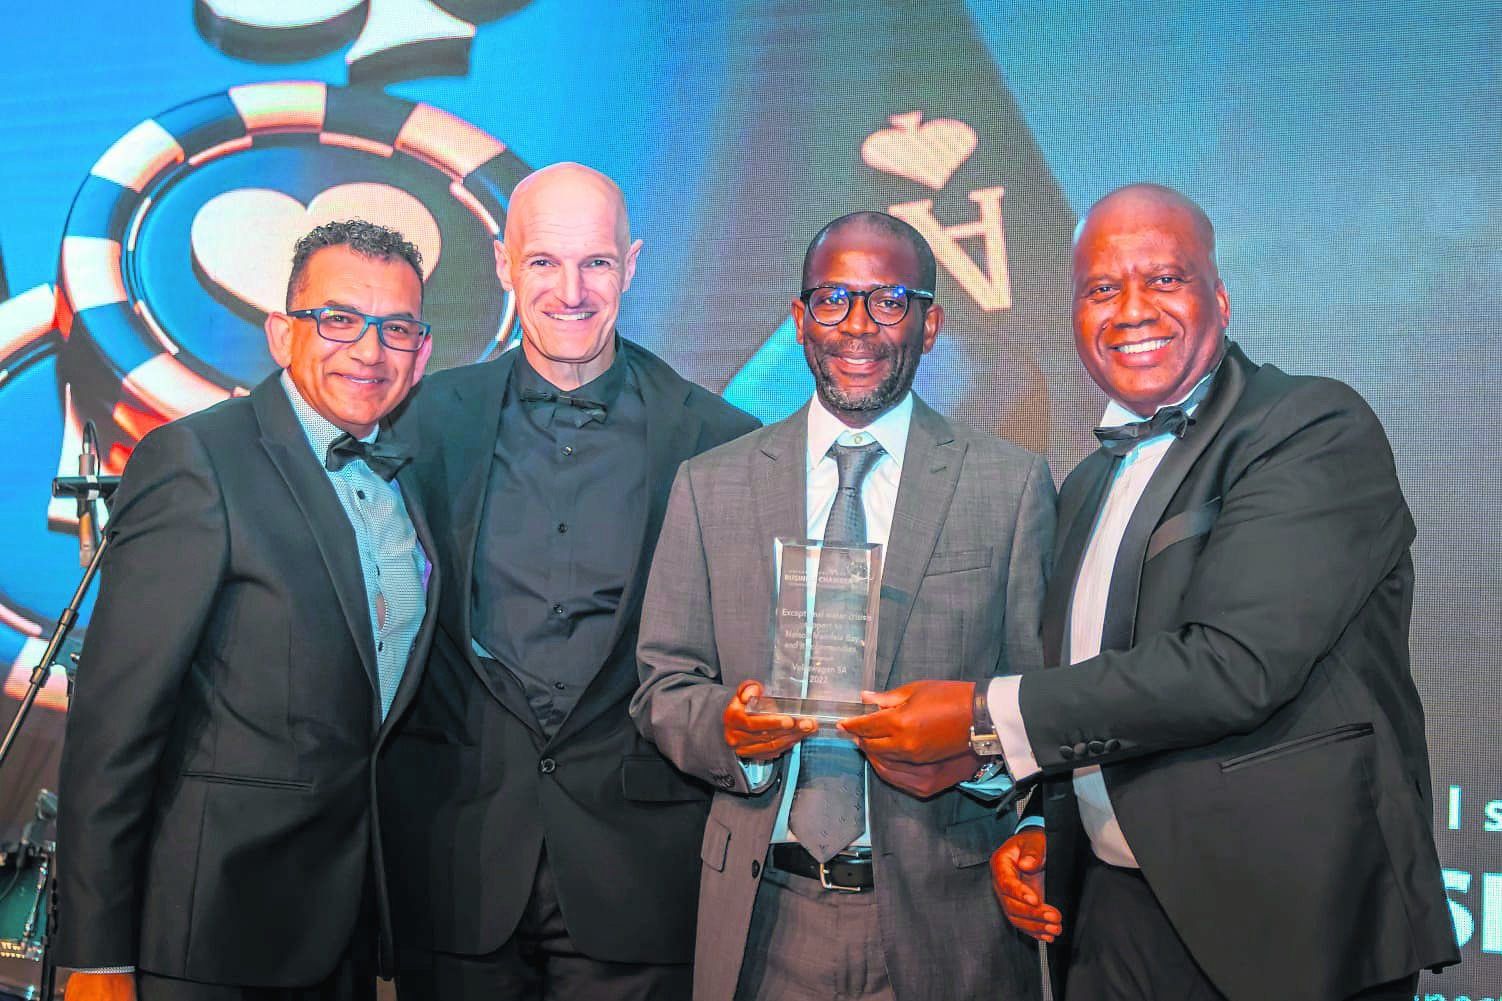 Volkswagen South Africa receives Water Crisis Award - News24